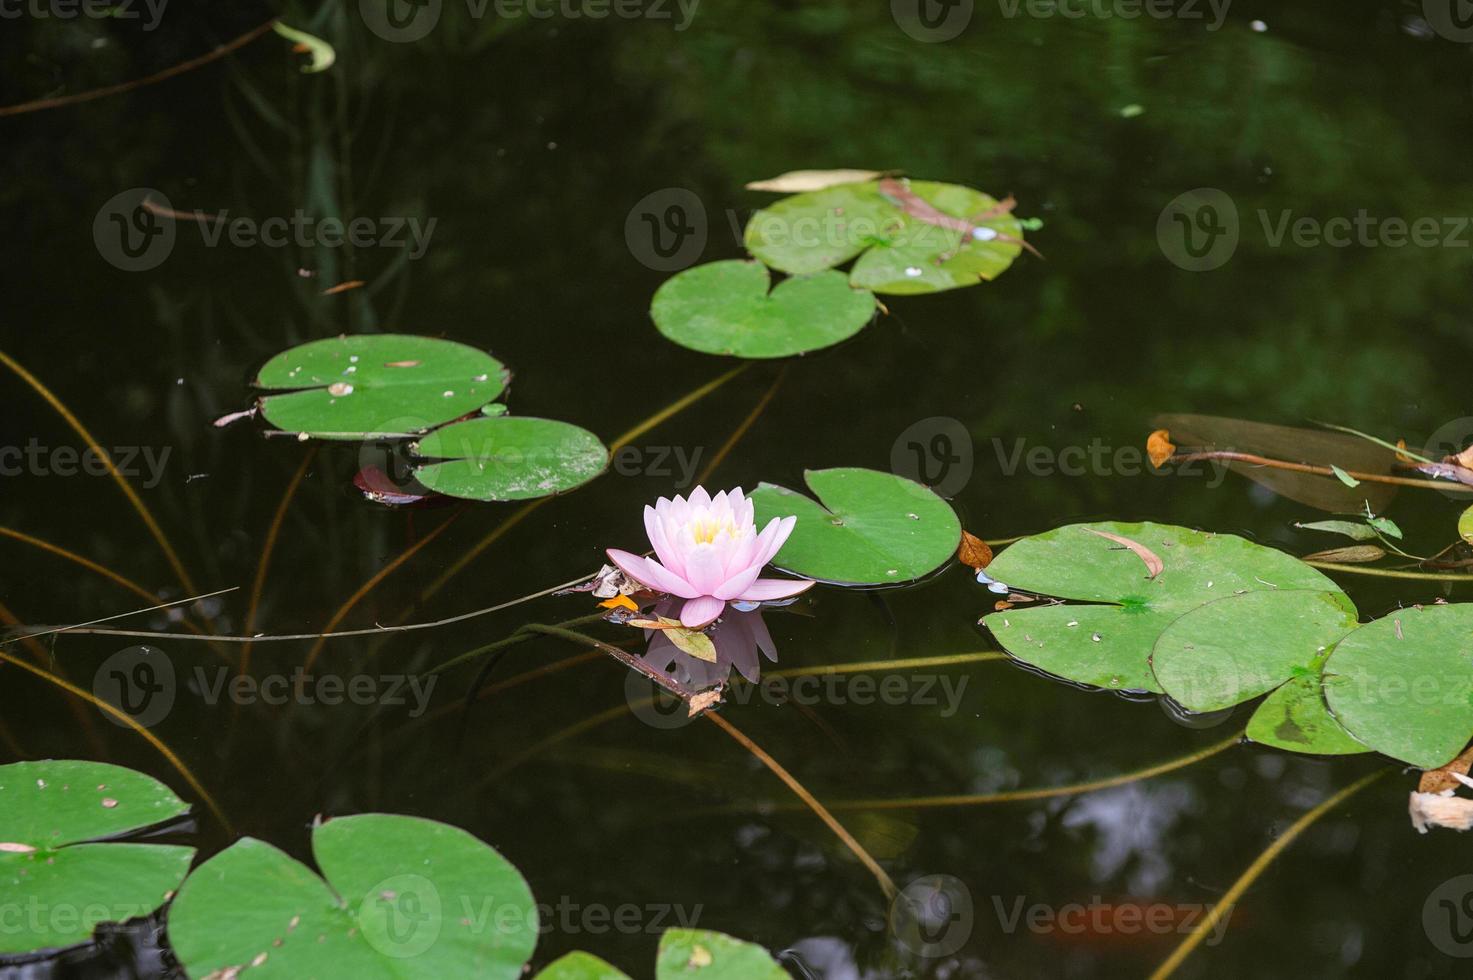 A pink water lily flower floats in a pond next to round green leaves photo